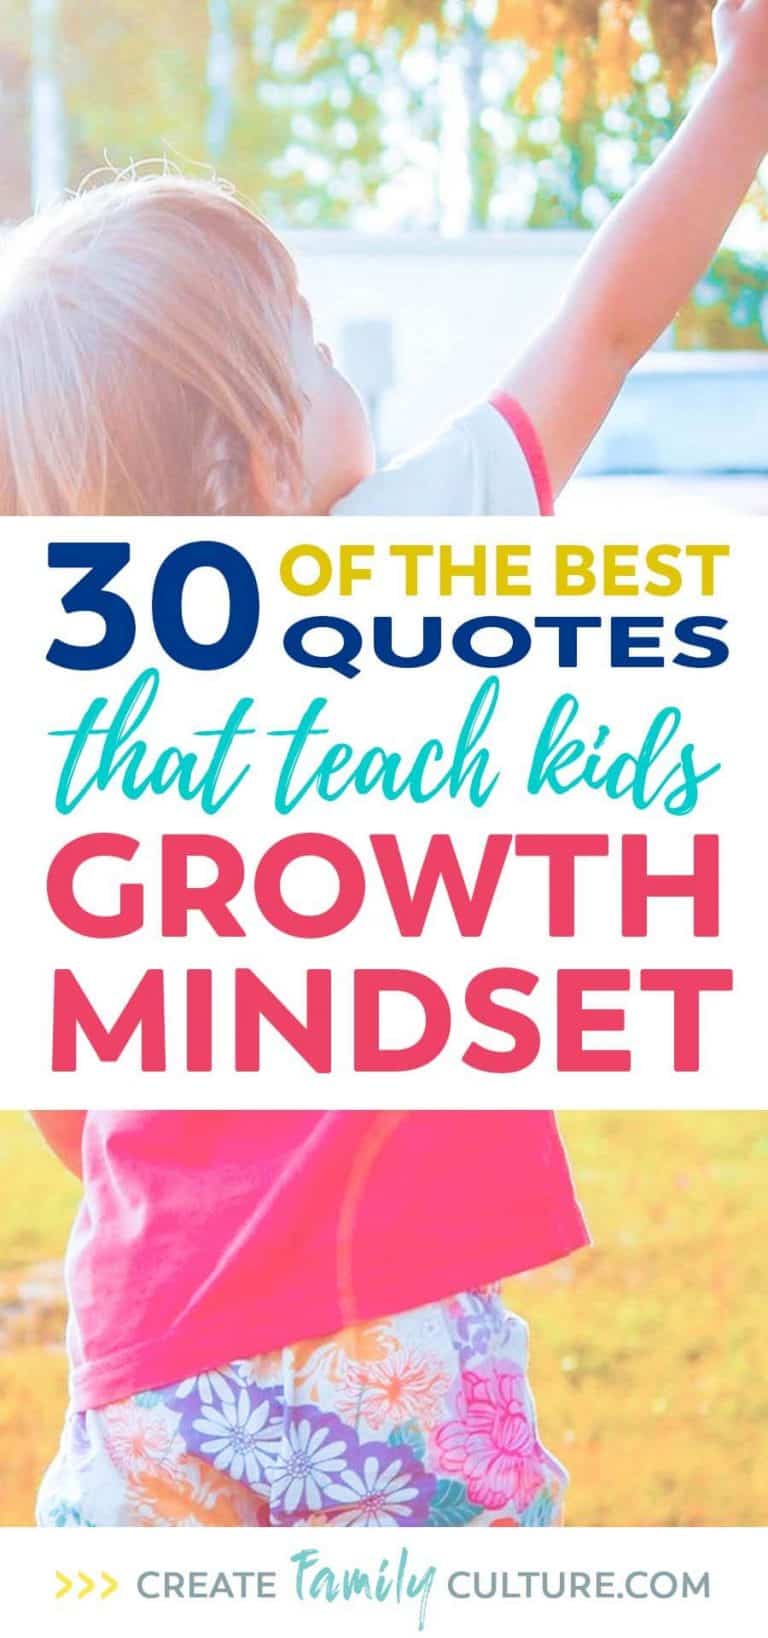 30 Growth Mindset Quotes for Kids - Create Family Culture